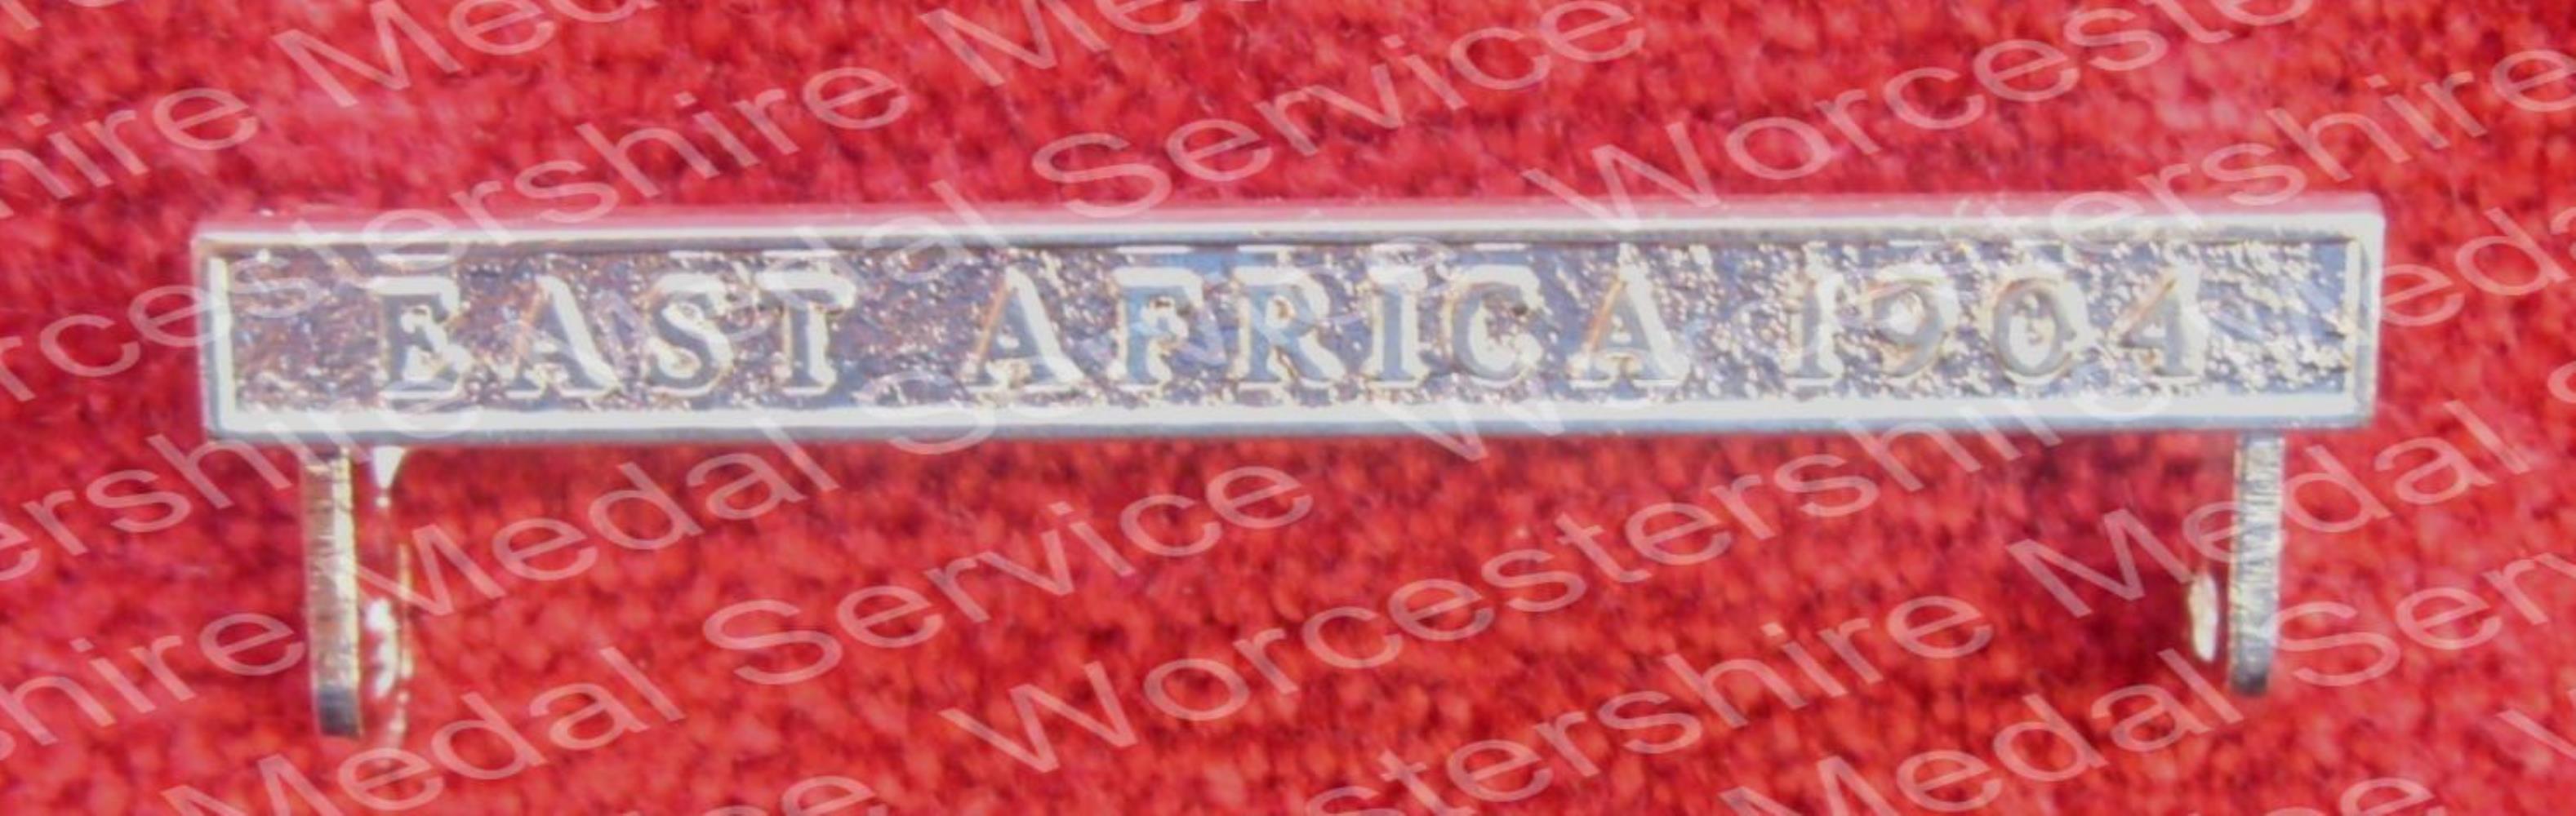 Worcestershire Medal Service: Clasp - East Africa 1904 (AGSM EV11)